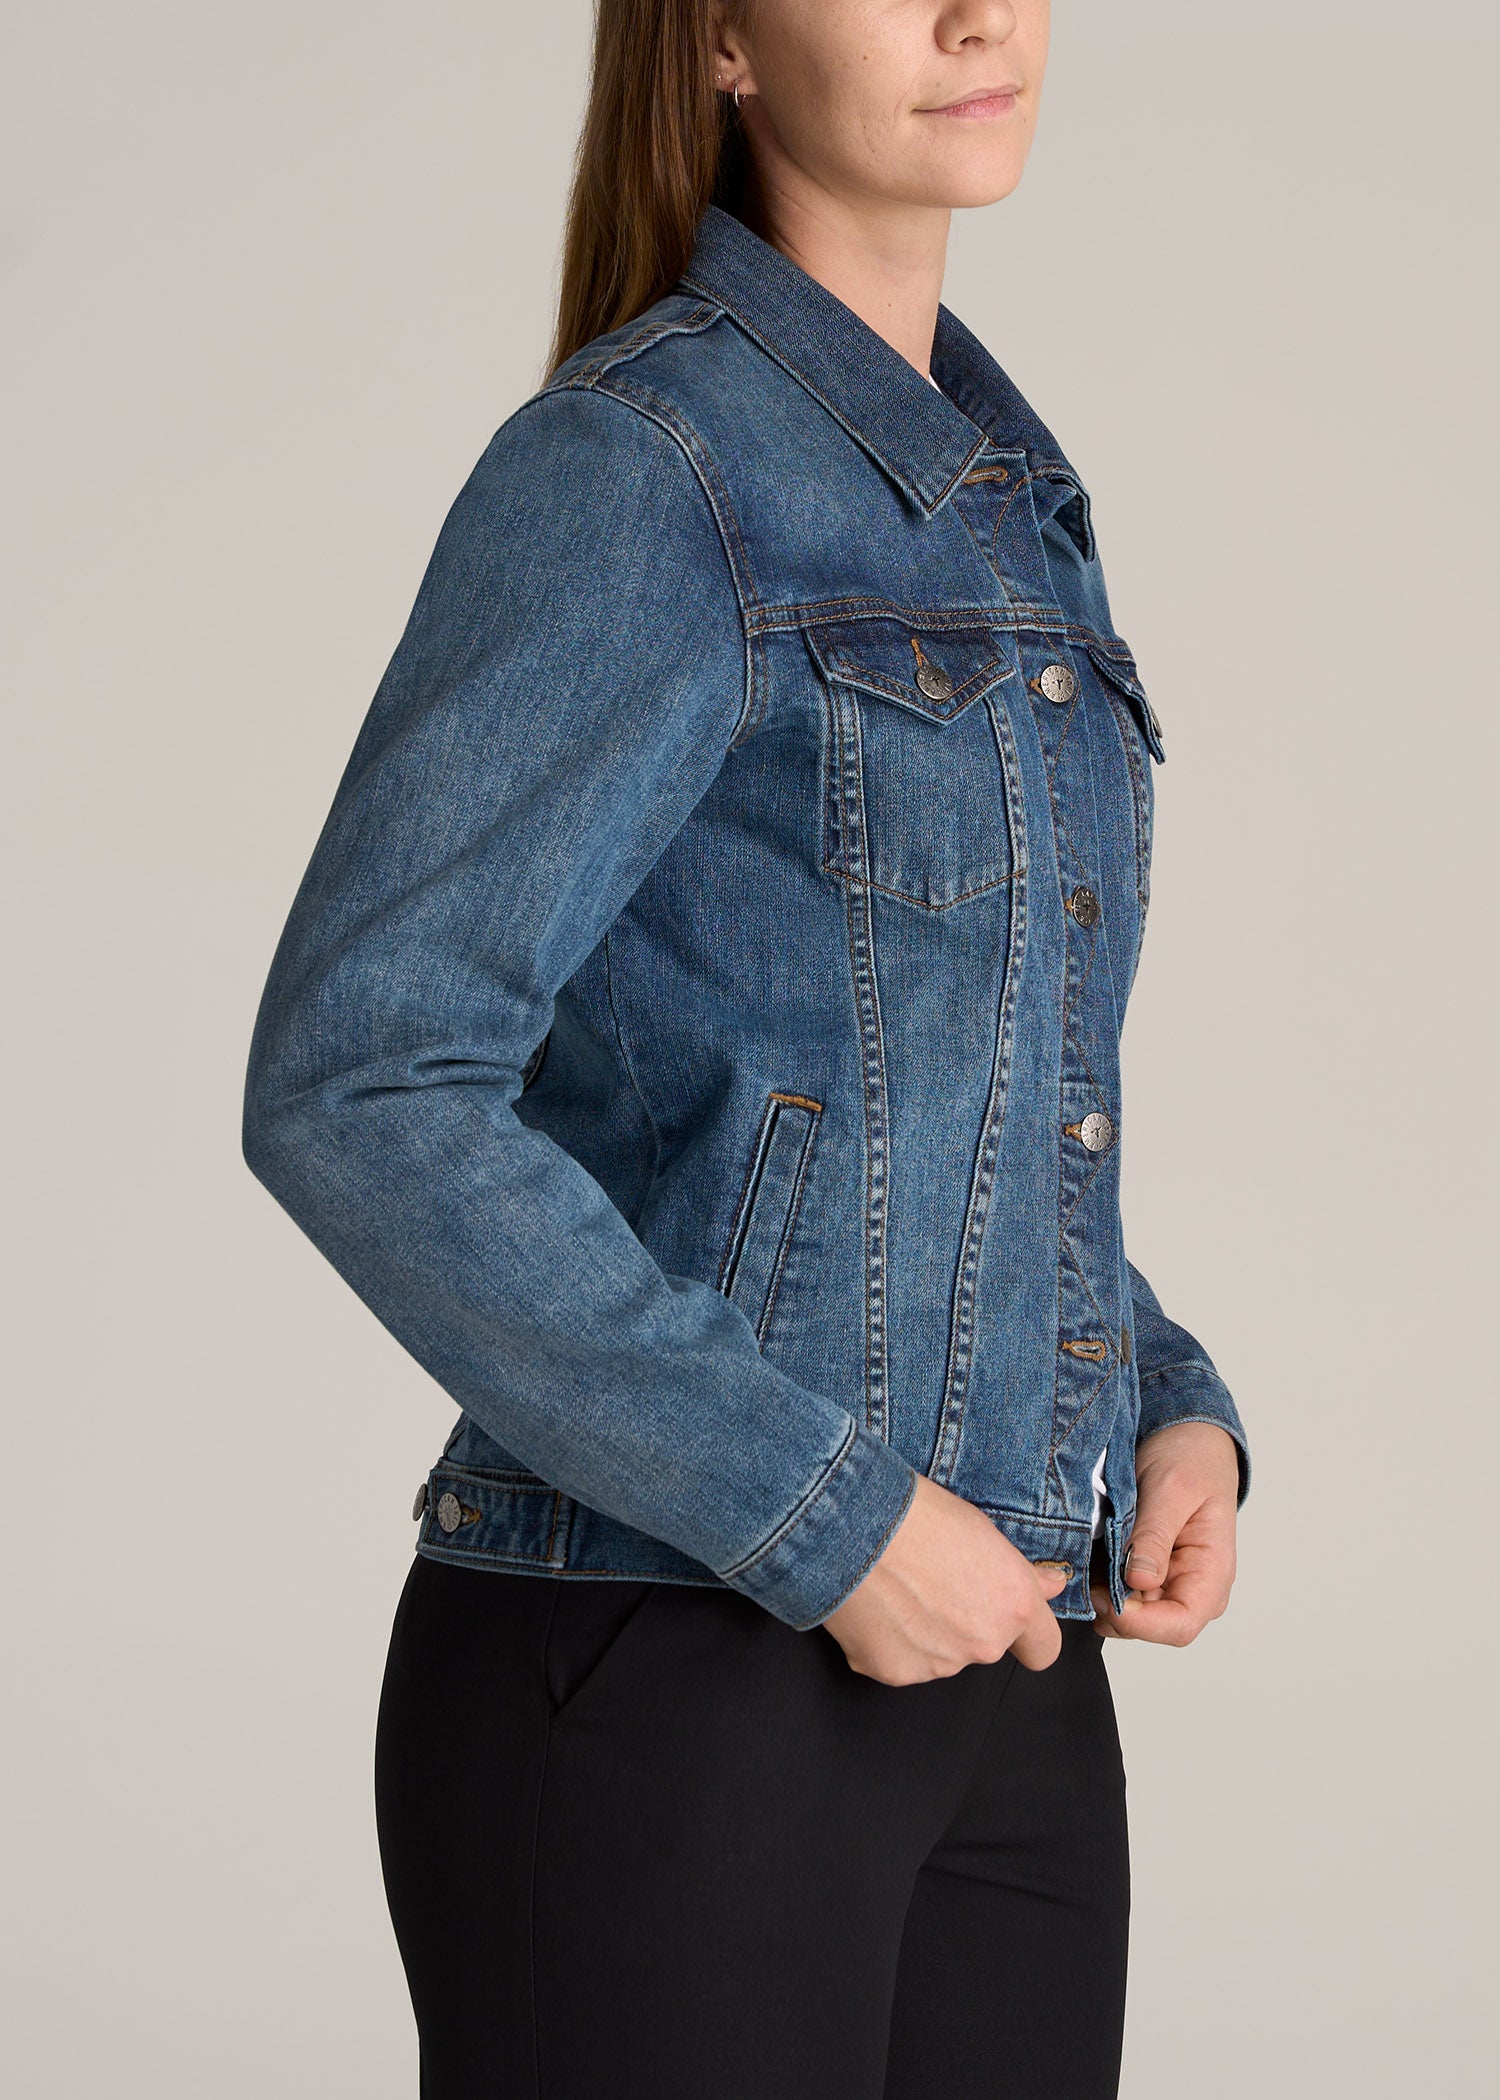 7 Jean Jacket Outfits For Any Occassion | Woman's World